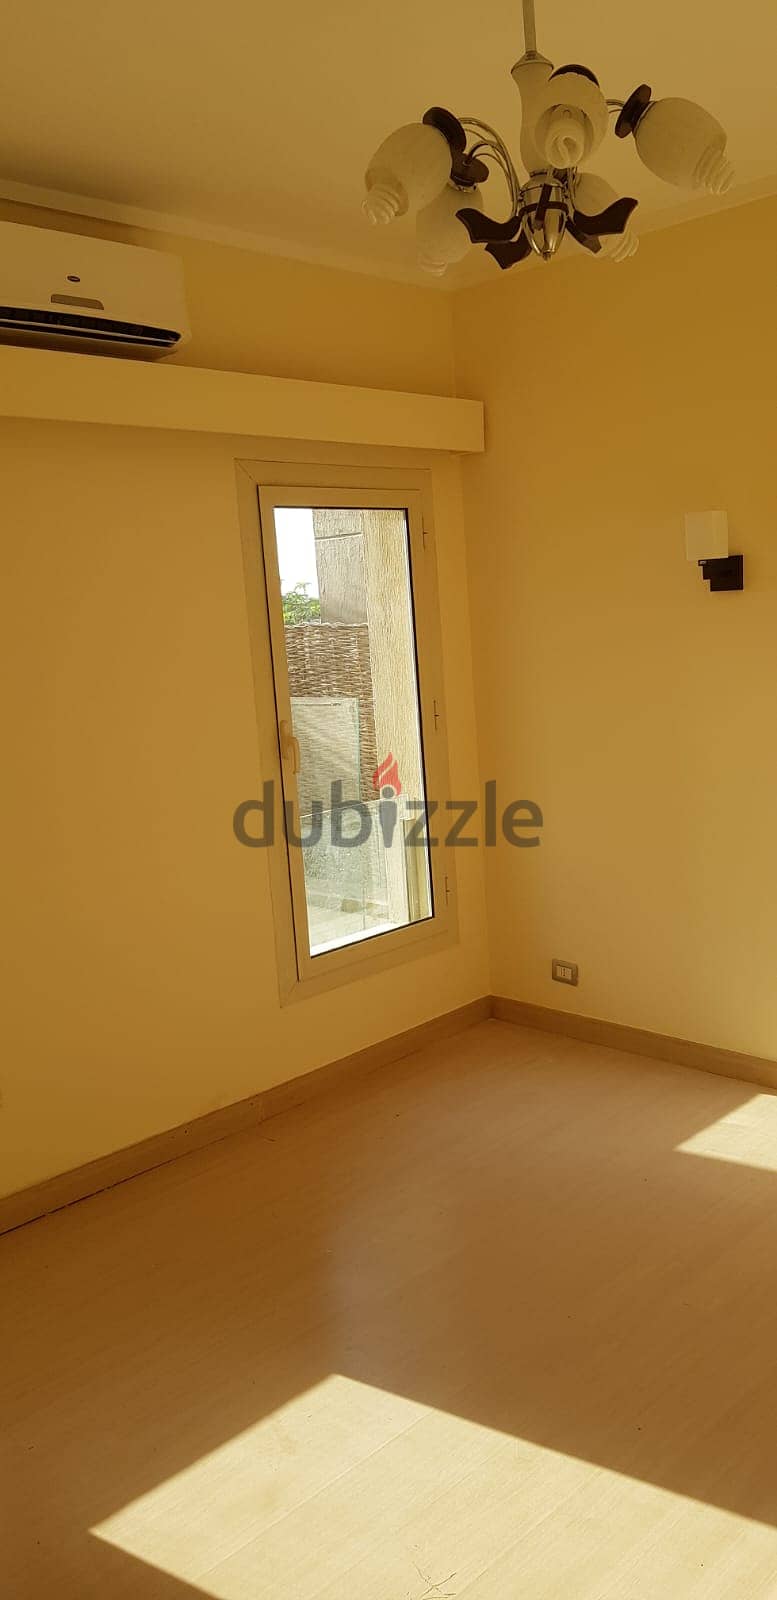 ground floor apartment with private garden near by point 90 mall with AC's and kitchen 1